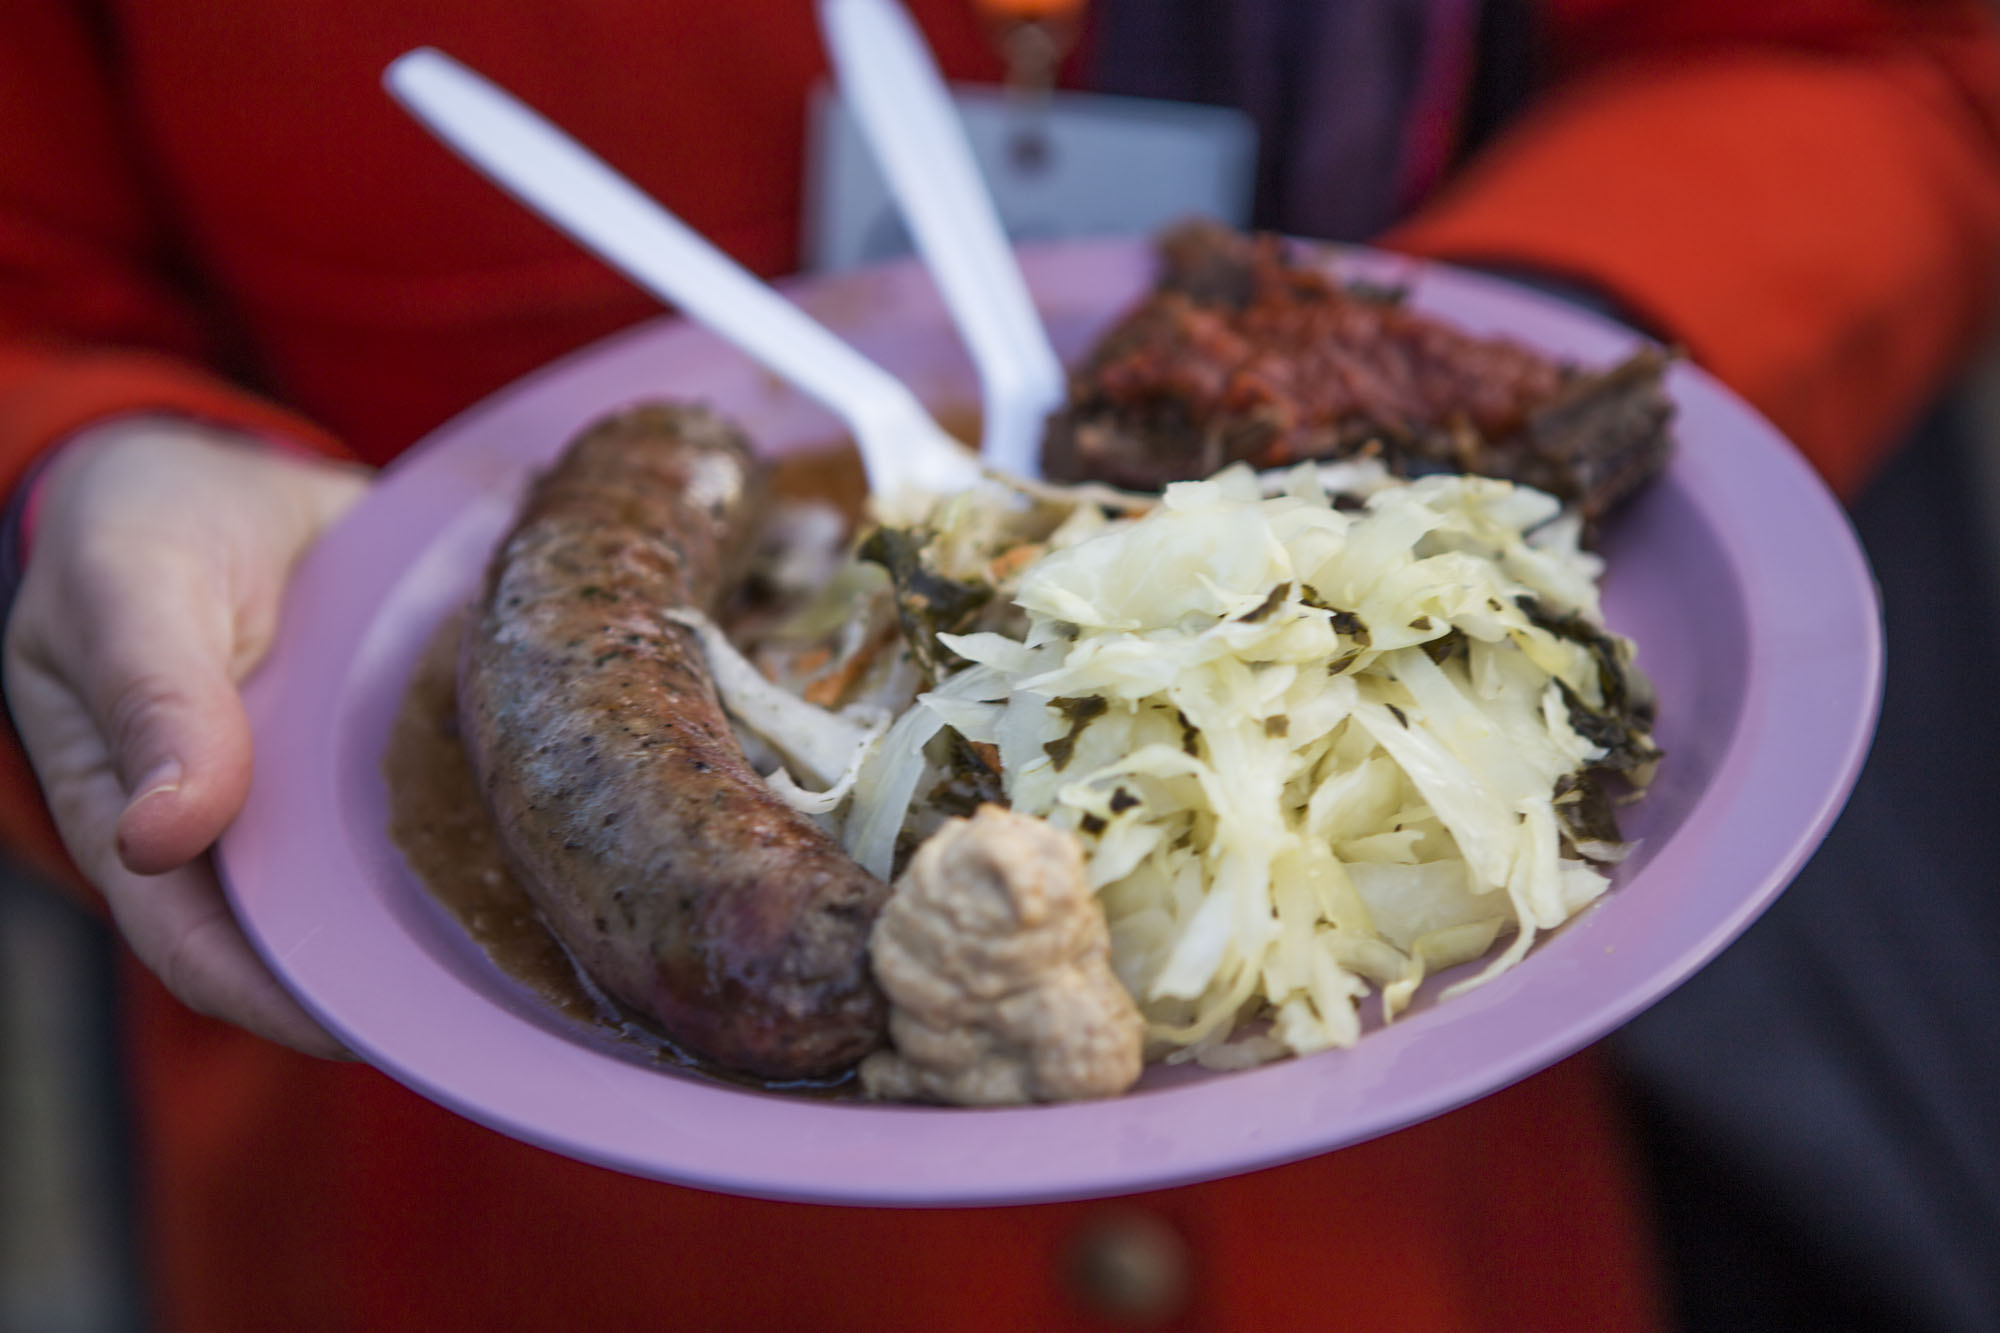  Delicious sausage &amp; brisket from The Branch Restaurant in Kemptville. Complete with slaw and saurkraut with kale! 